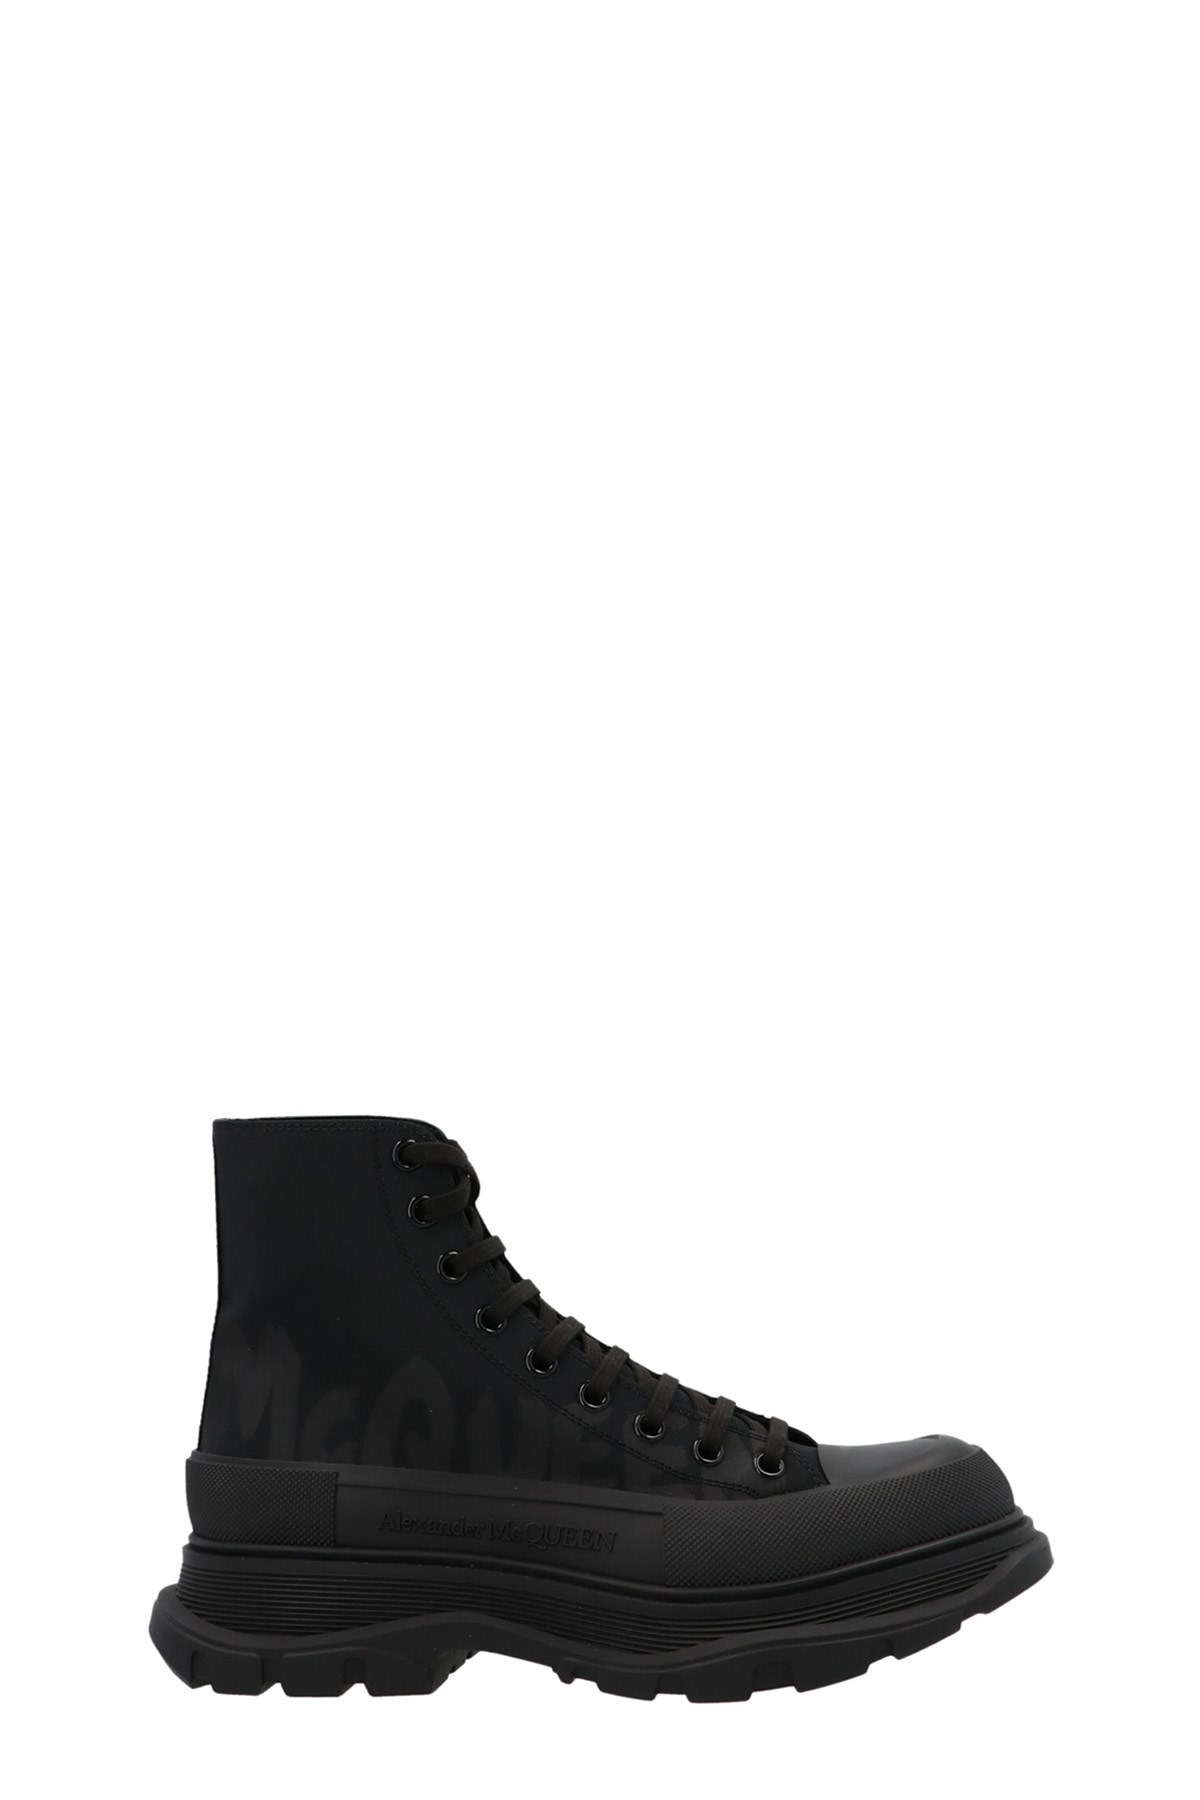 ALEXANDER MCQUEEN 'Poly Nylon’ Ankle Boots